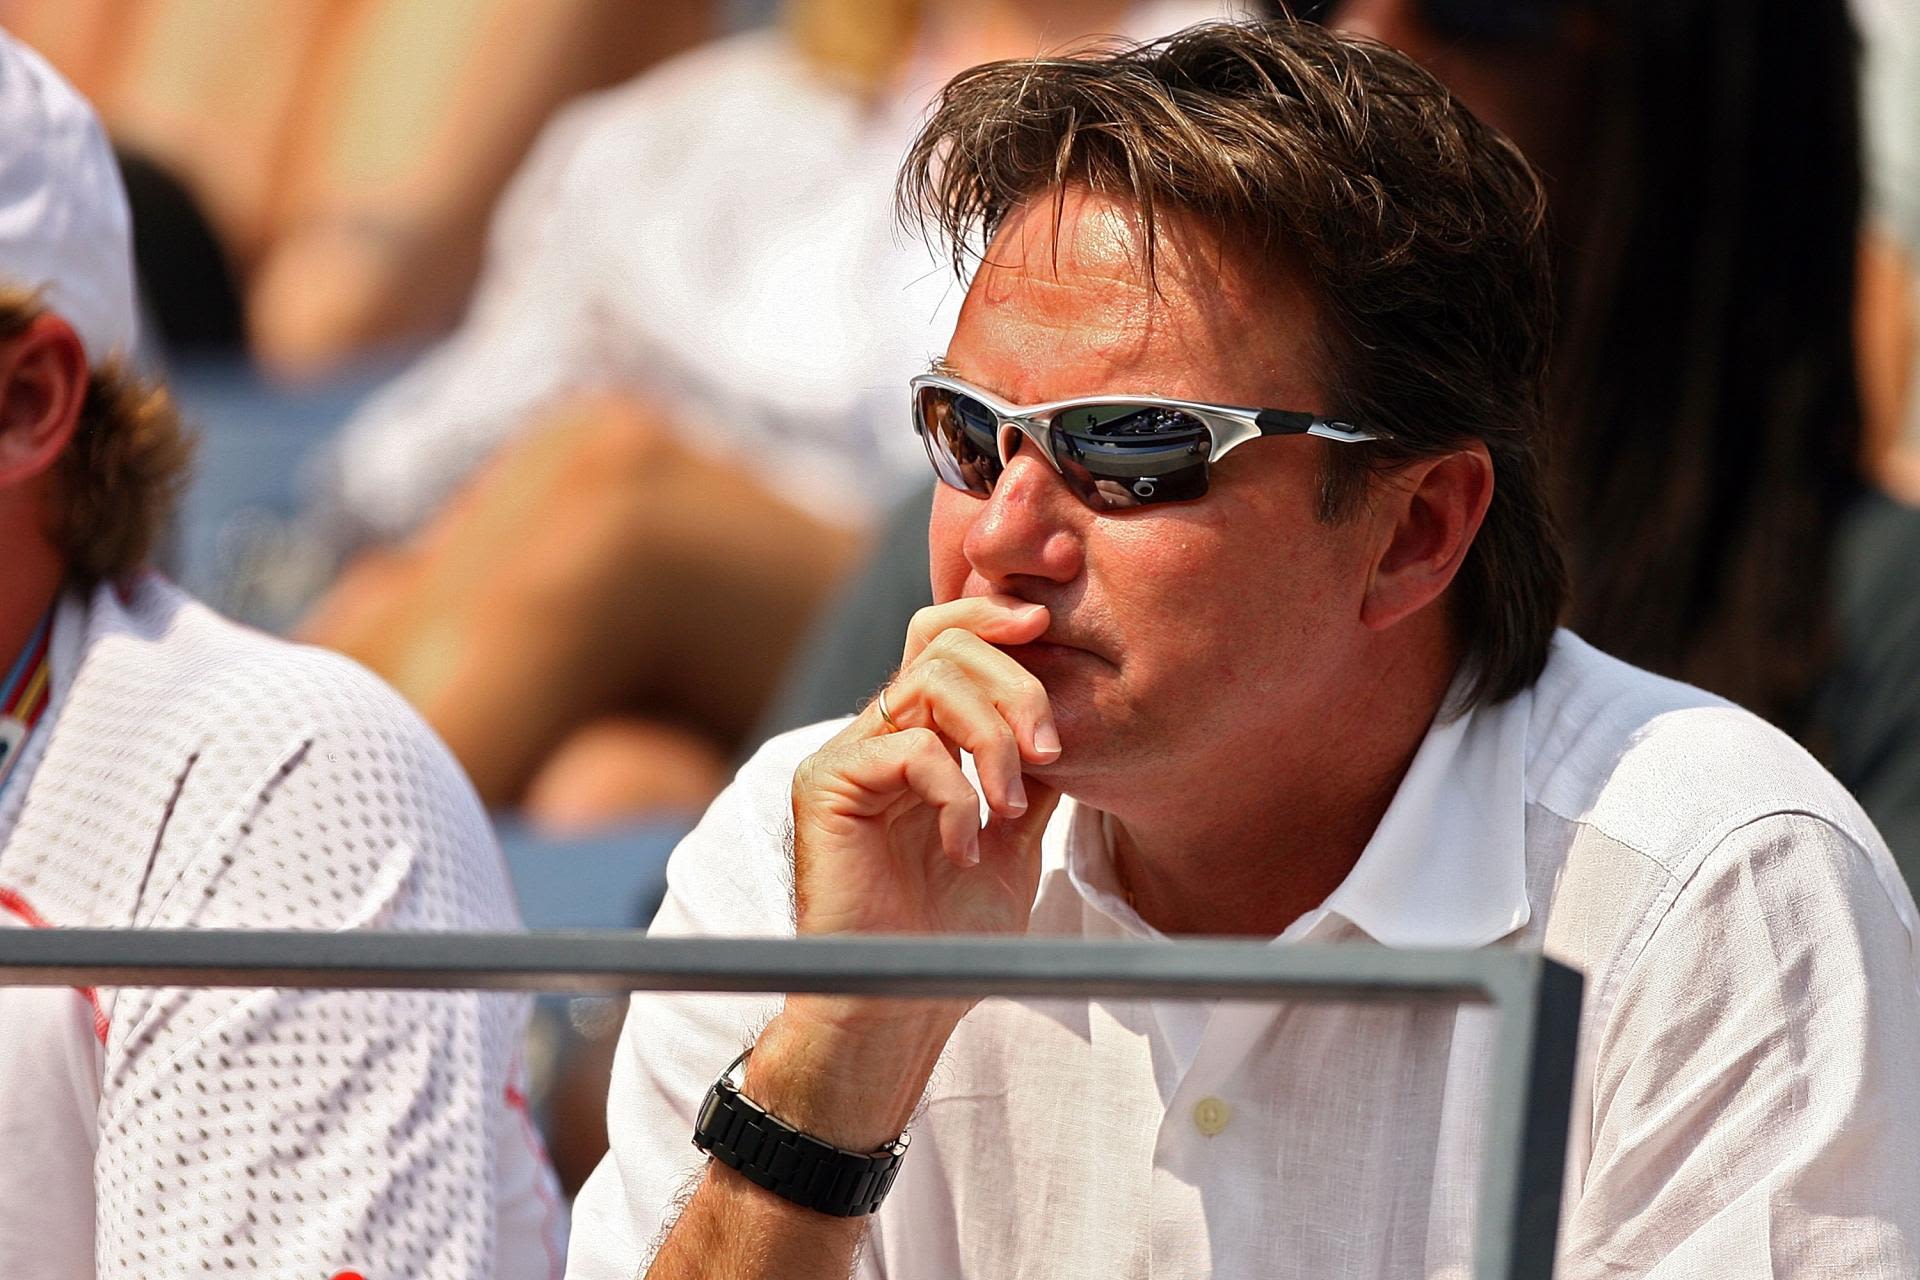 Tennis legend Jimmy Connors baffled by Novak Djokovic's confession: I'd never do that